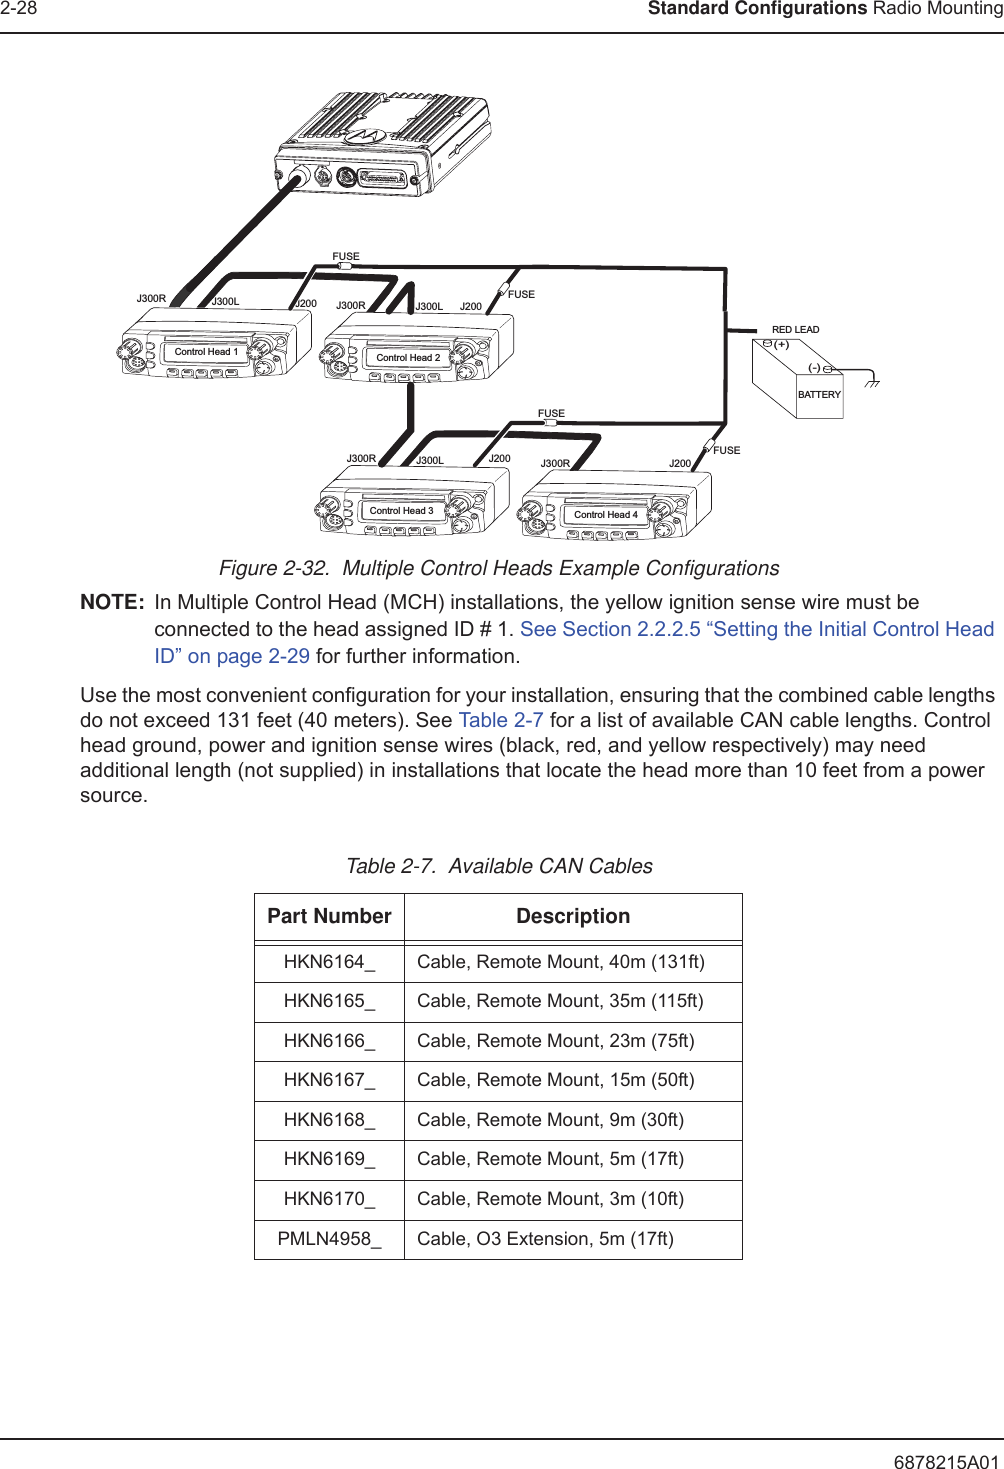 6878215A012-28 Standard Configurations Radio MountingFigure 2-32.  Multiple Control Heads Example ConfigurationsNOTE: In Multiple Control Head (MCH) installations, the yellow ignition sense wire must be connected to the head assigned ID # 1. See Section 2.2.2.5 “Setting the Initial Control Head ID” on page 2-29 for further information.Use the most convenient configuration for your installation, ensuring that the combined cable lengths do not exceed 131 feet (40 meters). See Table 2-7 for a list of available CAN cable lengths. Control head ground, power and ignition sense wires (black, red, and yellow respectively) may need additional length (not supplied) in installations that locate the head more than 10 feet from a power source.Table 2-7.  Available CAN CablesPart Number DescriptionHKN6164_ Cable, Remote Mount, 40m (131ft)HKN6165_ Cable, Remote Mount, 35m (115ft)HKN6166_ Cable, Remote Mount, 23m (75ft)HKN6167_ Cable, Remote Mount, 15m (50ft)HKN6168_ Cable, Remote Mount, 9m (30ft)HKN6169_ Cable, Remote Mount, 5m (17ft)HKN6170_ Cable, Remote Mount, 3m (10ft)PMLN4958_ Cable, O3 Extension, 5m (17ft)Control Head 1 Control Head 2J300R J300RJ200 J200J300L J300L(-)RED LEAD(+)BATTERYFUSEFUSEFUSEFUSEControl Head 3 Control Head 4J300RJ200 J200J300LJ300R